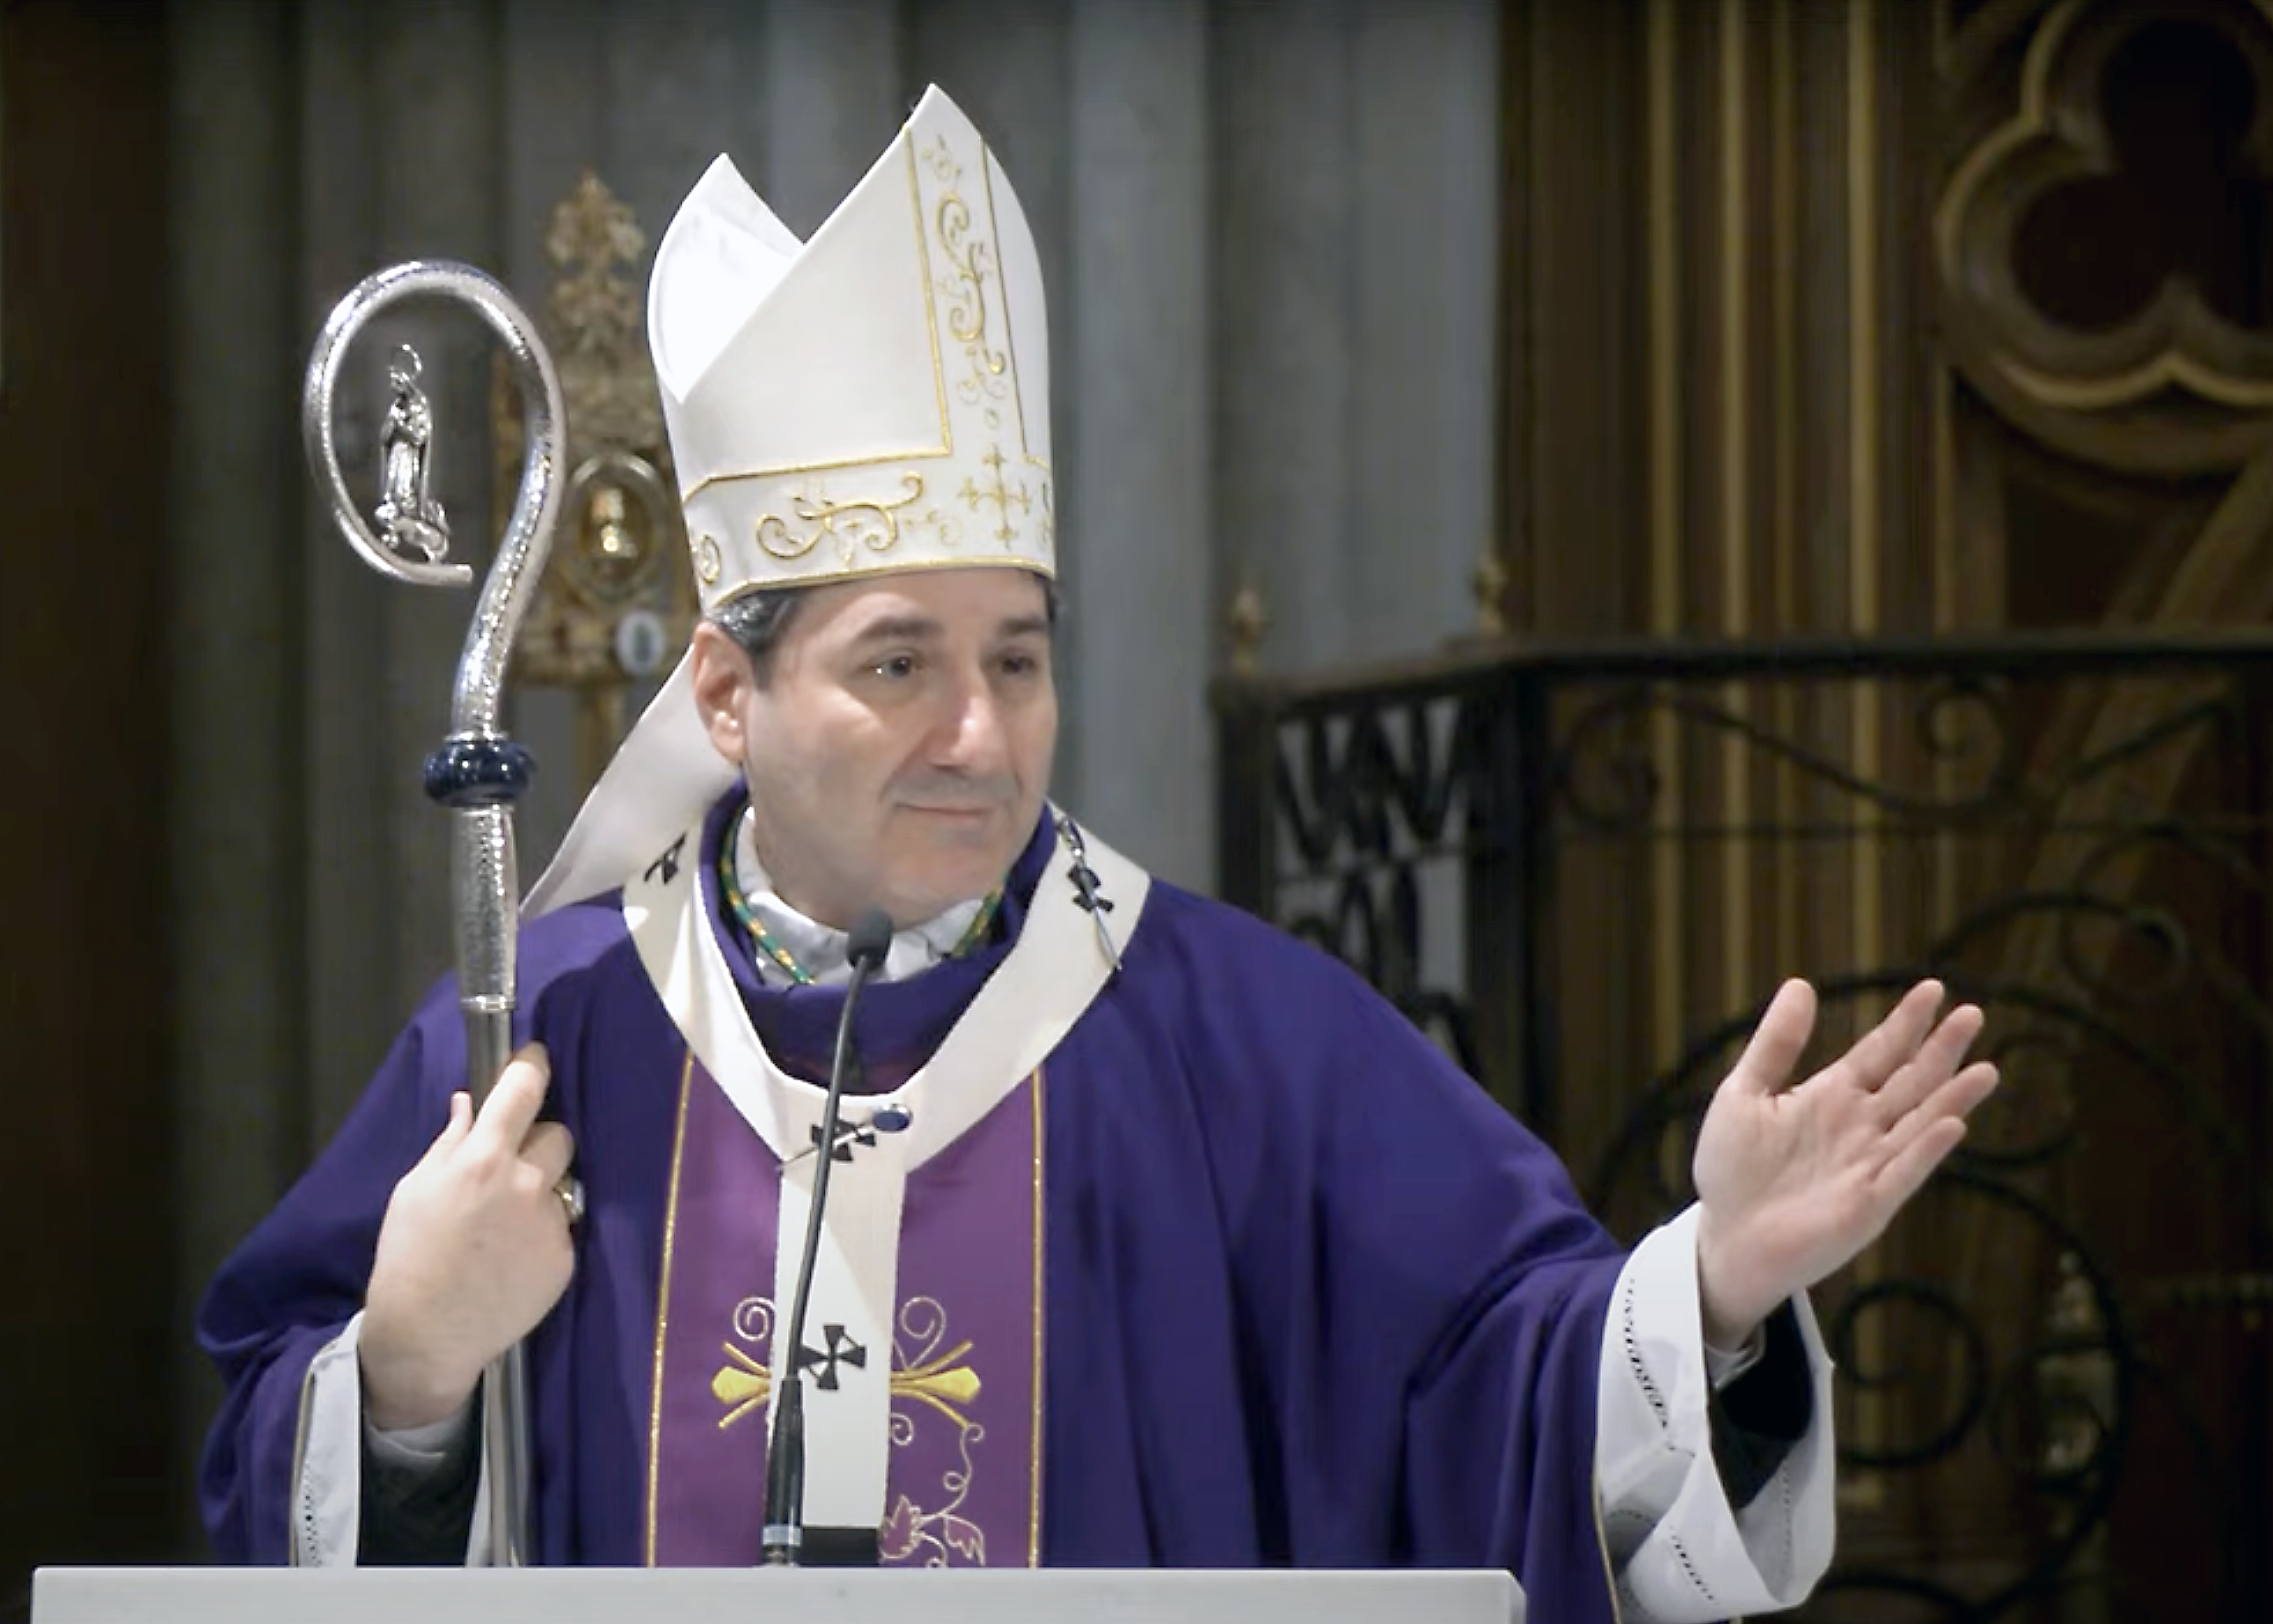 Archbishop Leo's Homily for the First Sunday of Lent